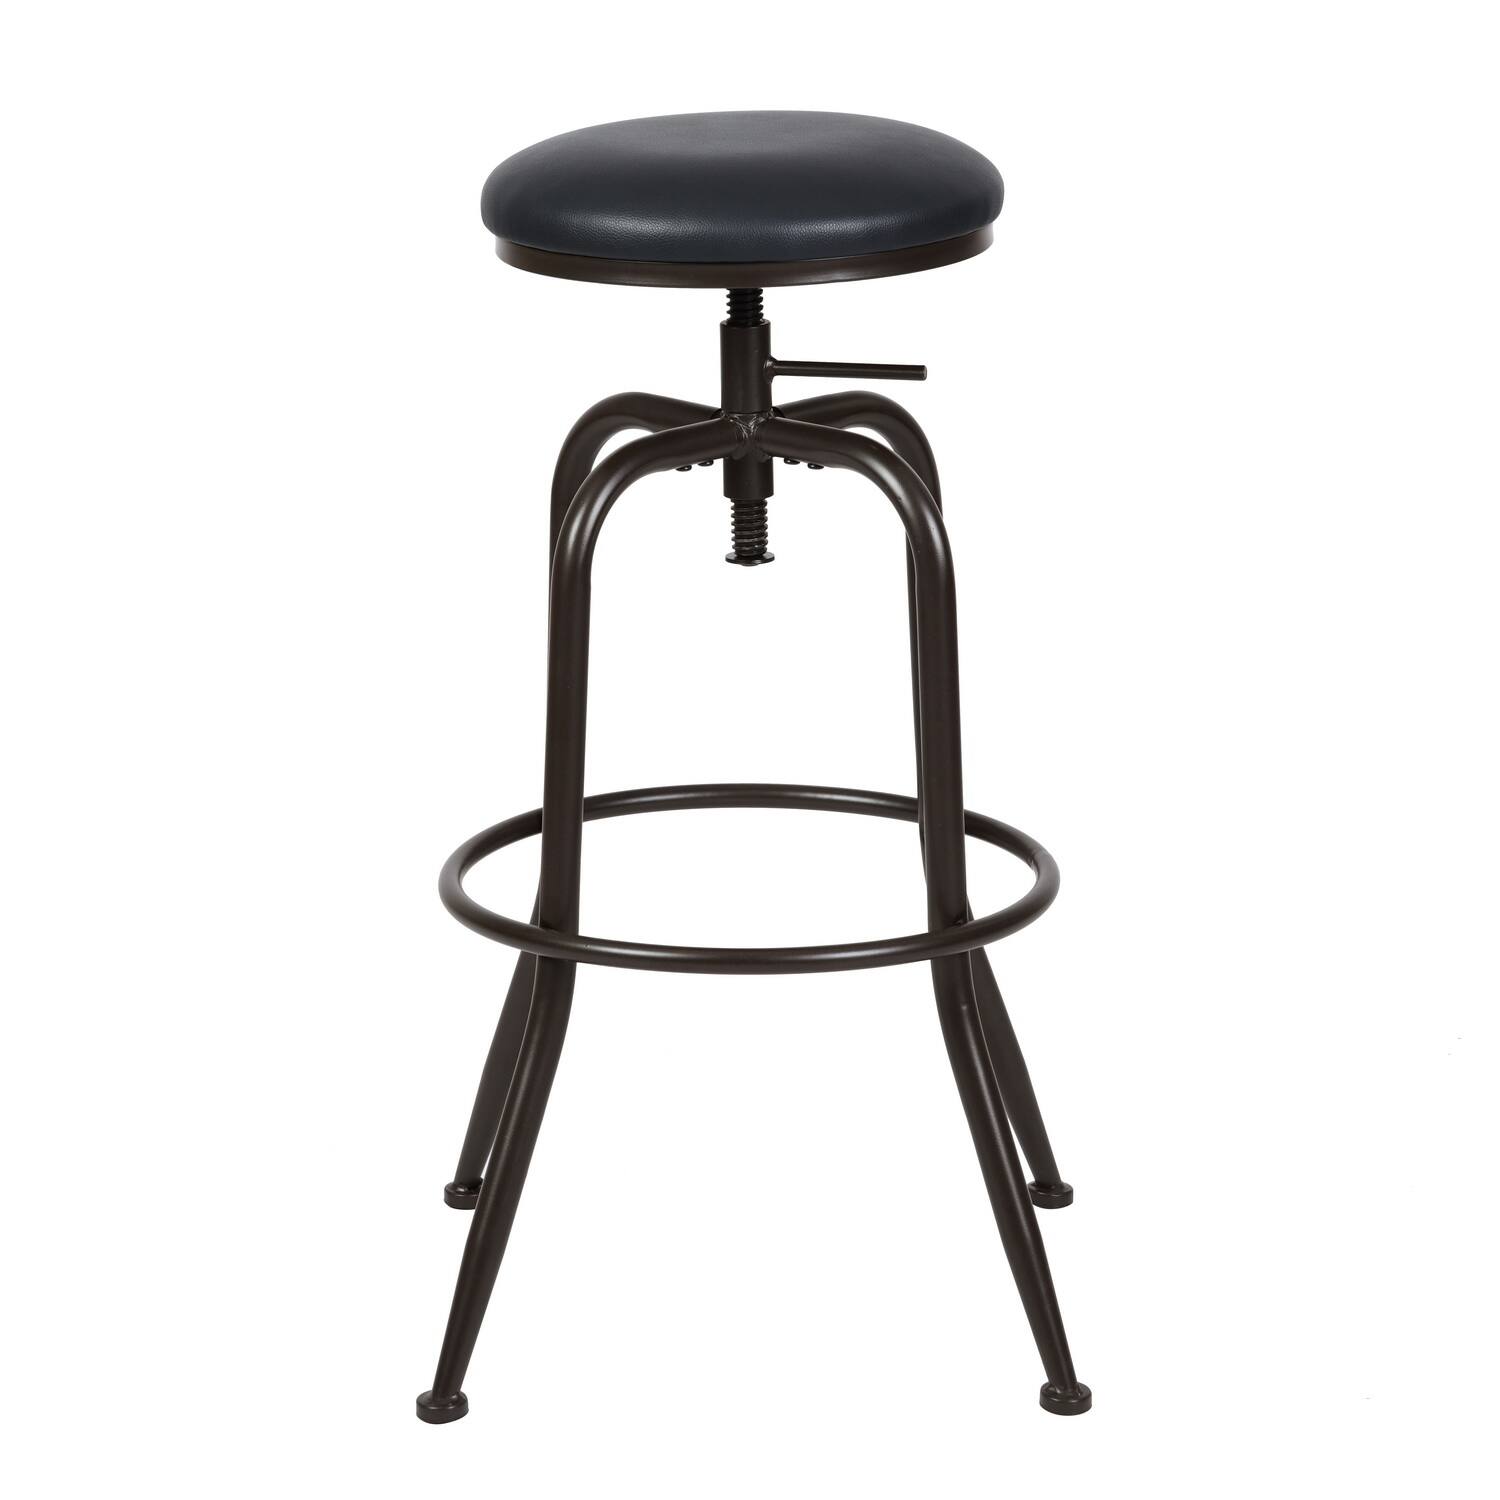 Walker Bar Stools Height Adjustable Kitchen Stool with Cushion Seat ...